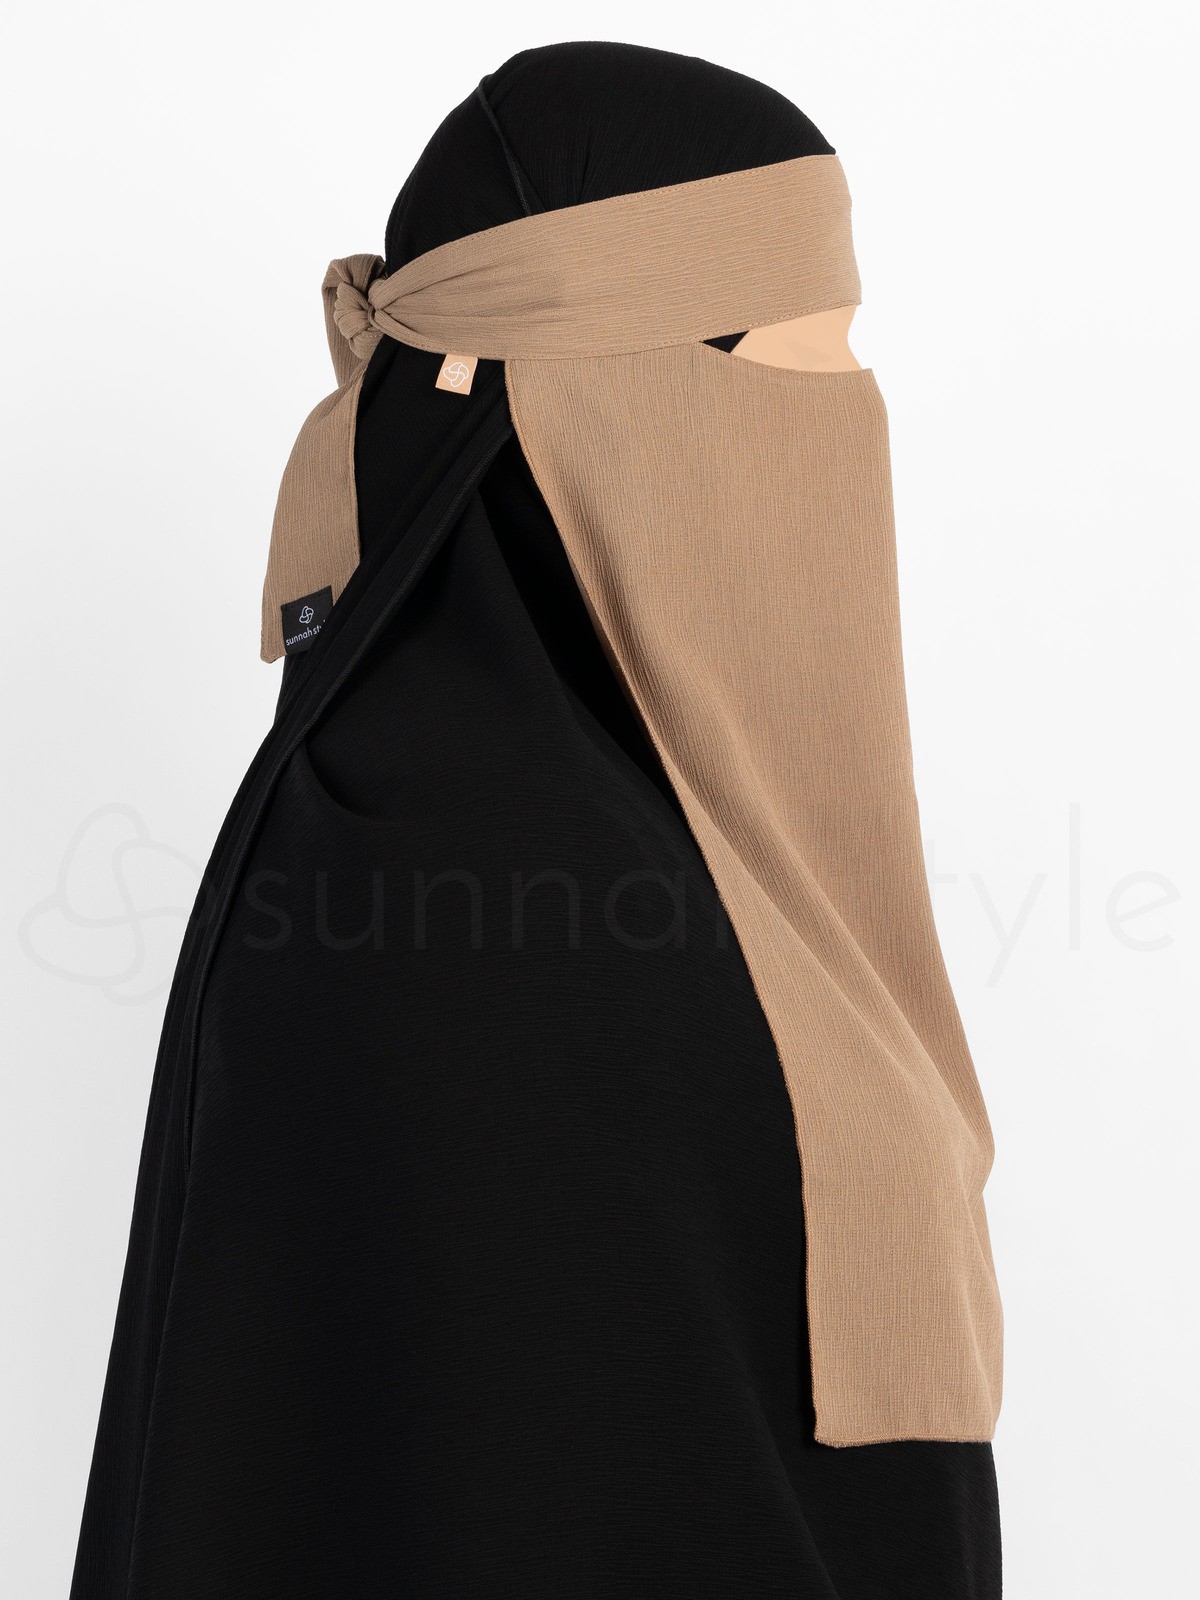 Sunnah Style - Brushed One Layer Niqab (Warm Taupe)